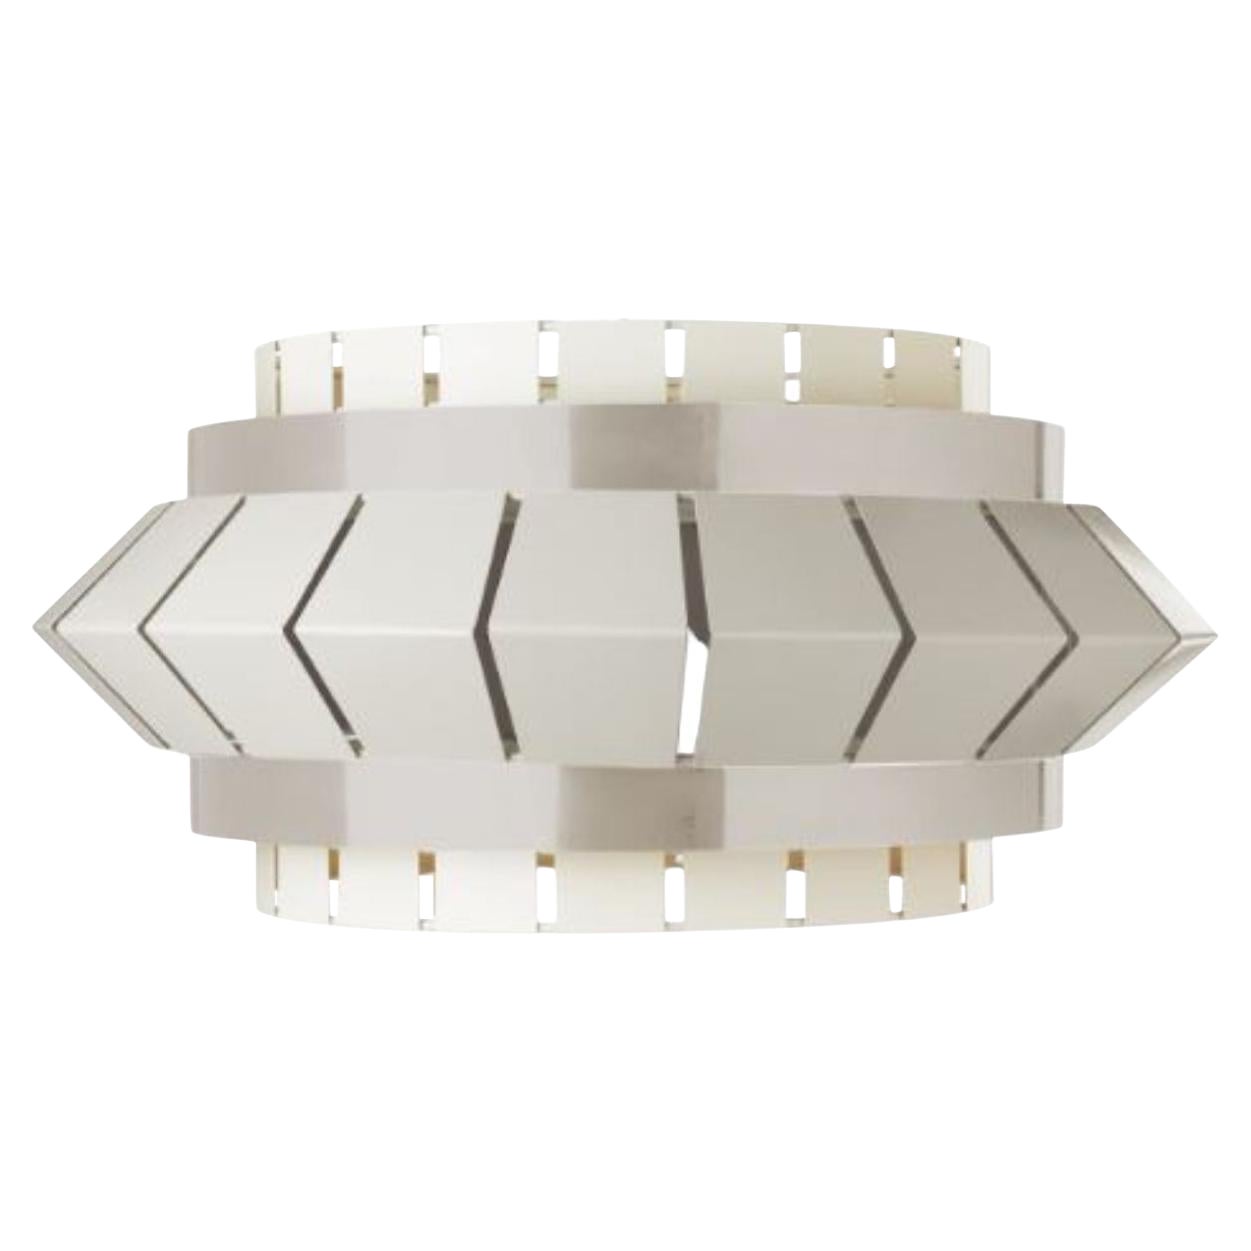 Ivory Comb I Suspension Lamp by Dooq